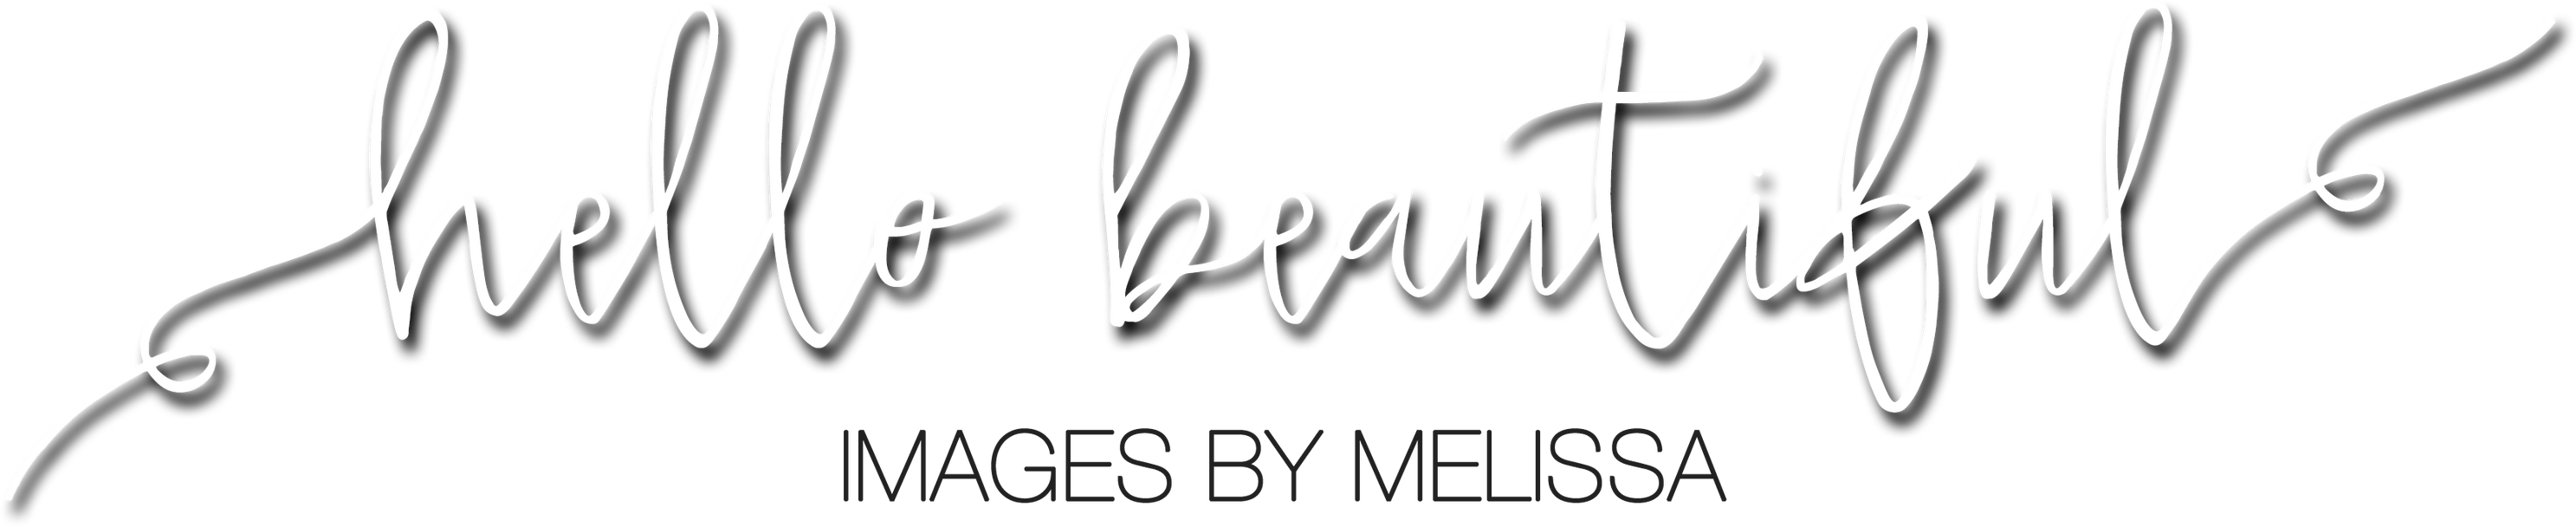 Hello Beautiful Images by Melissa 